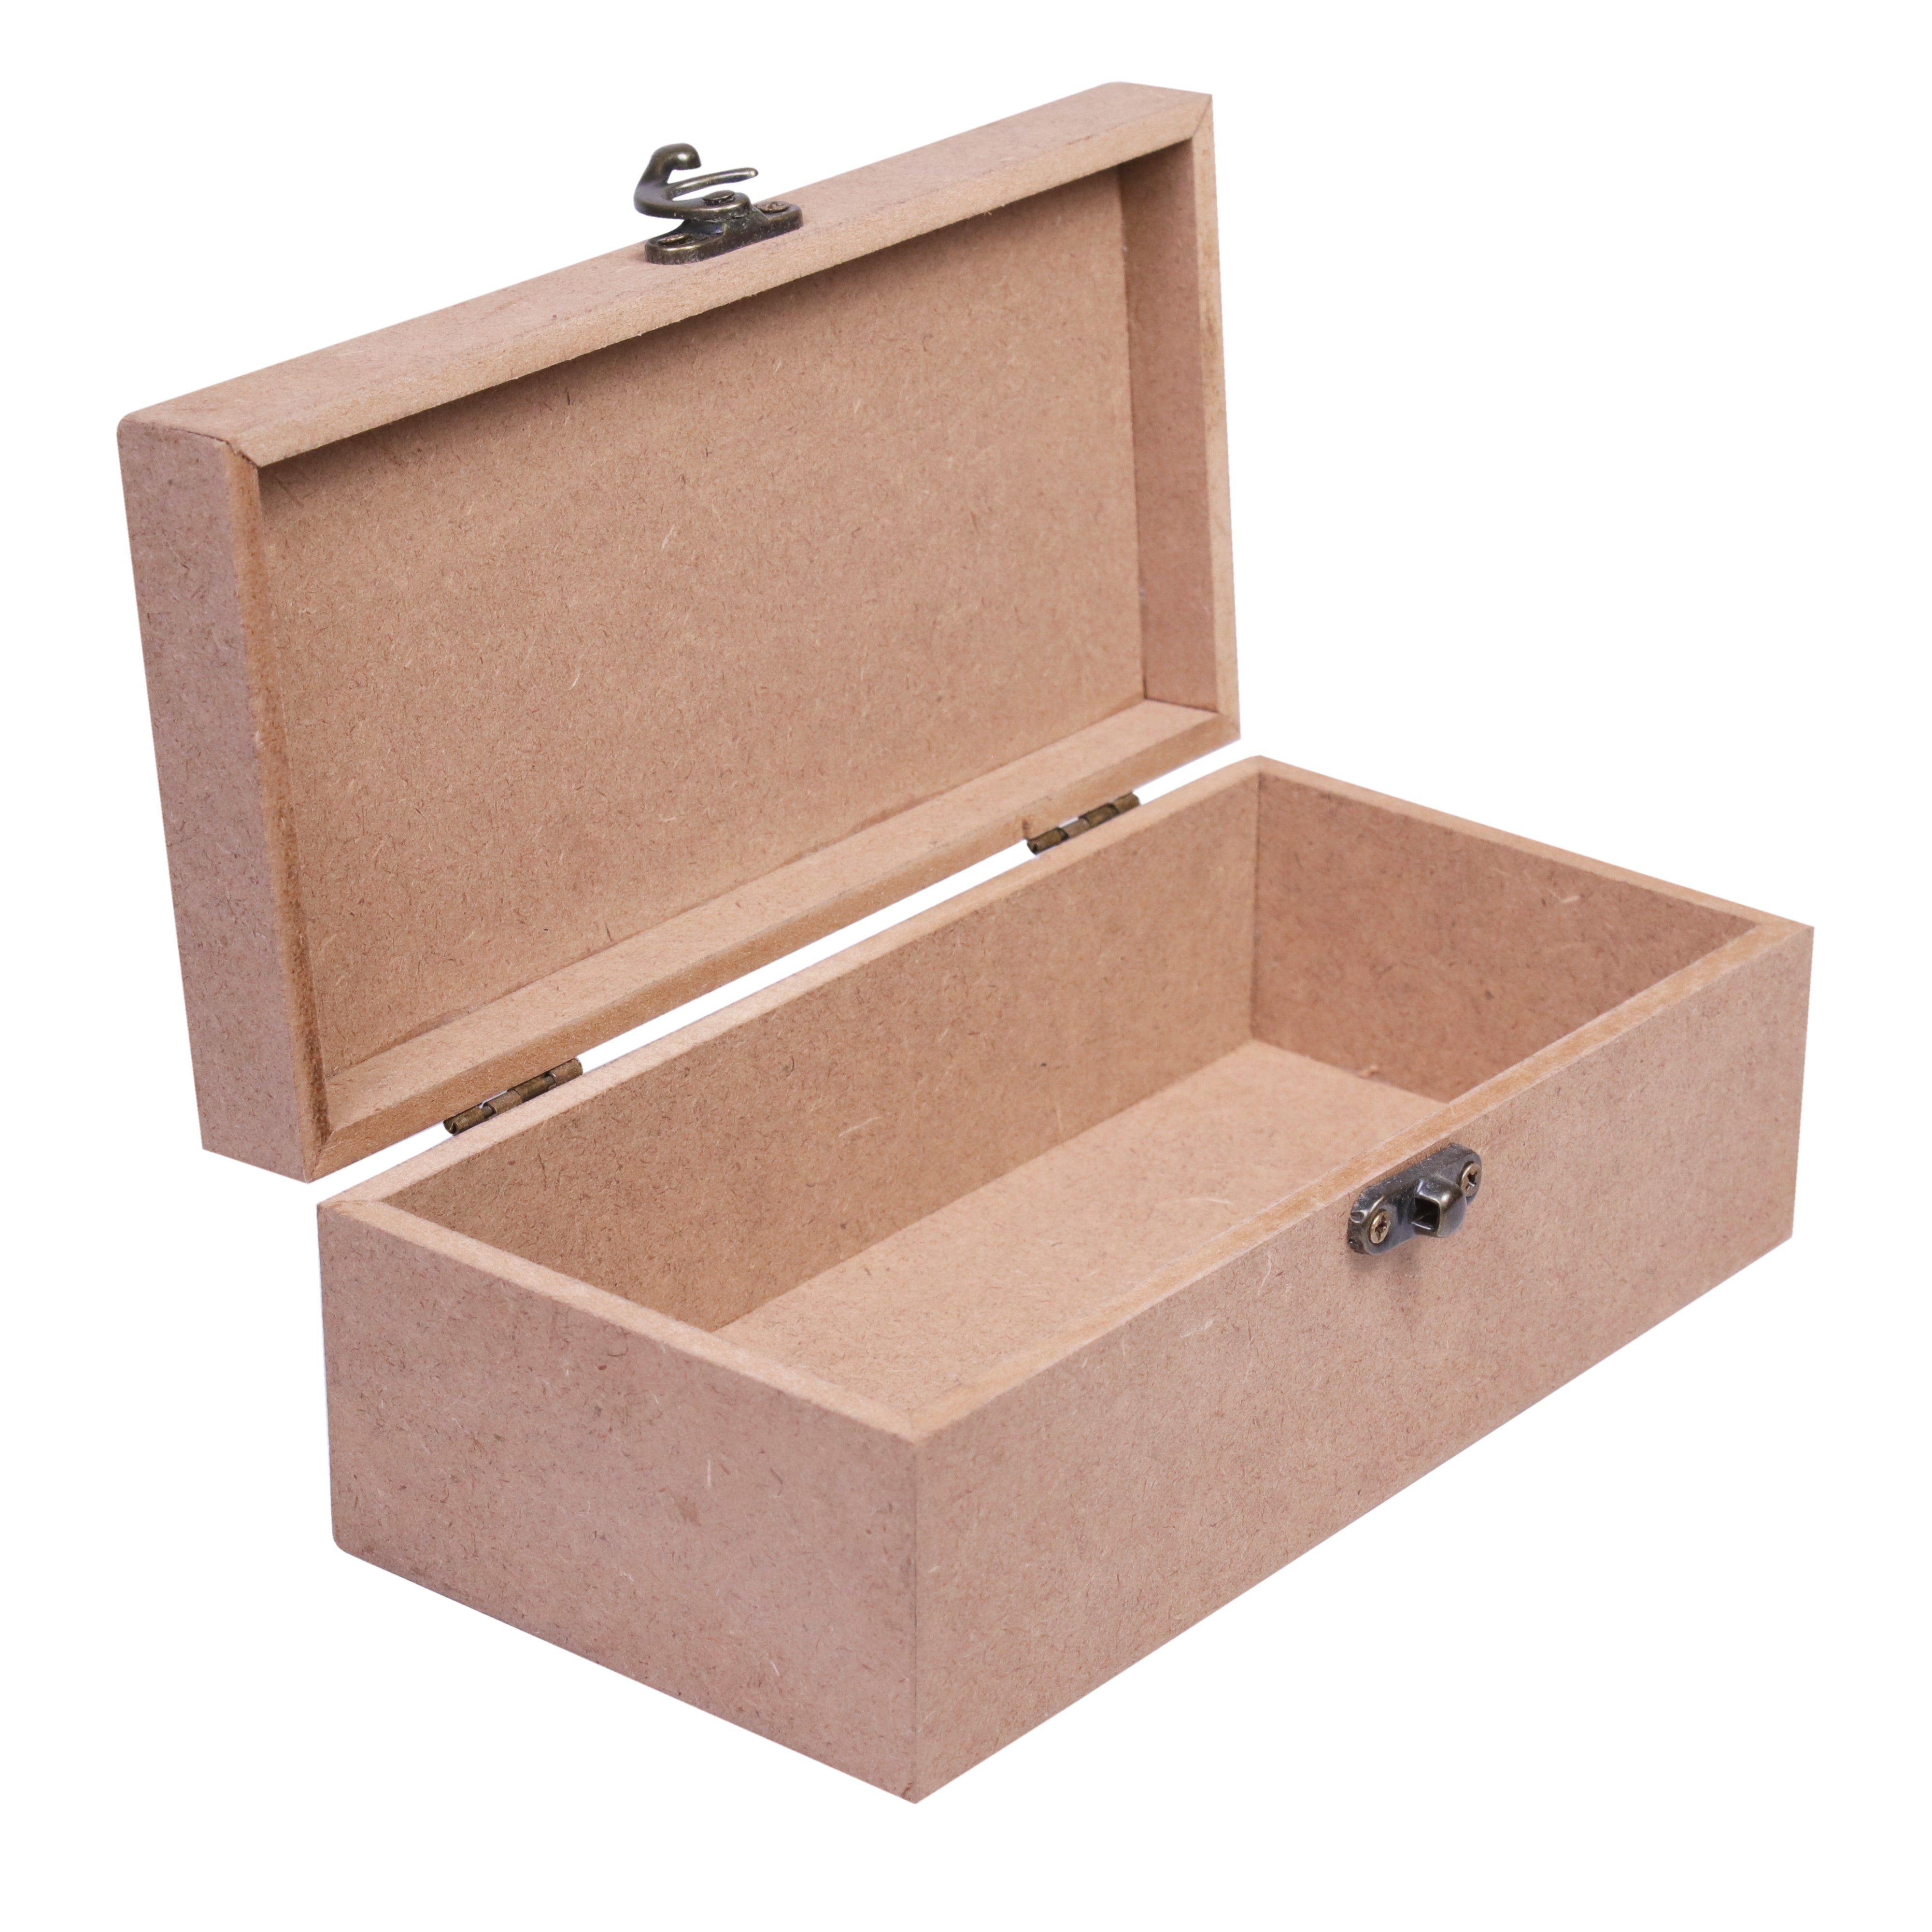 Mdf Box With Latch Rectangle 8 X 4 X 2.75Inch 5.5Mm Thick 1Pc Sw Lb